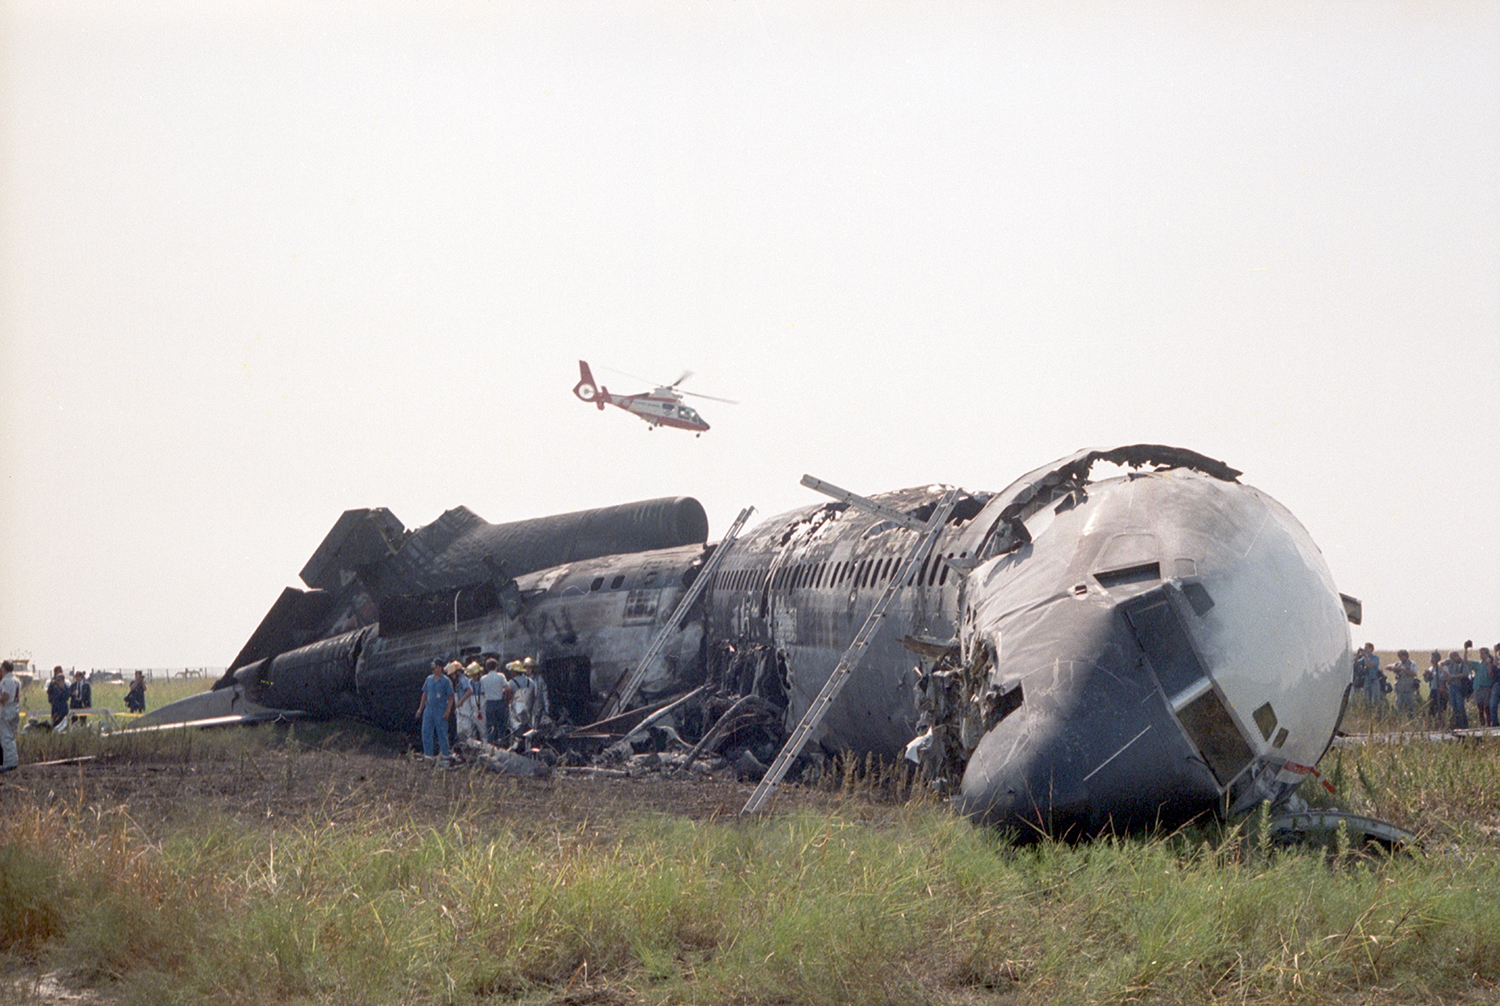 Color photo of a airplane crashed in a grassy field with a helicopter seen hovering above it and rescue workers seen gathered near the wreckage.